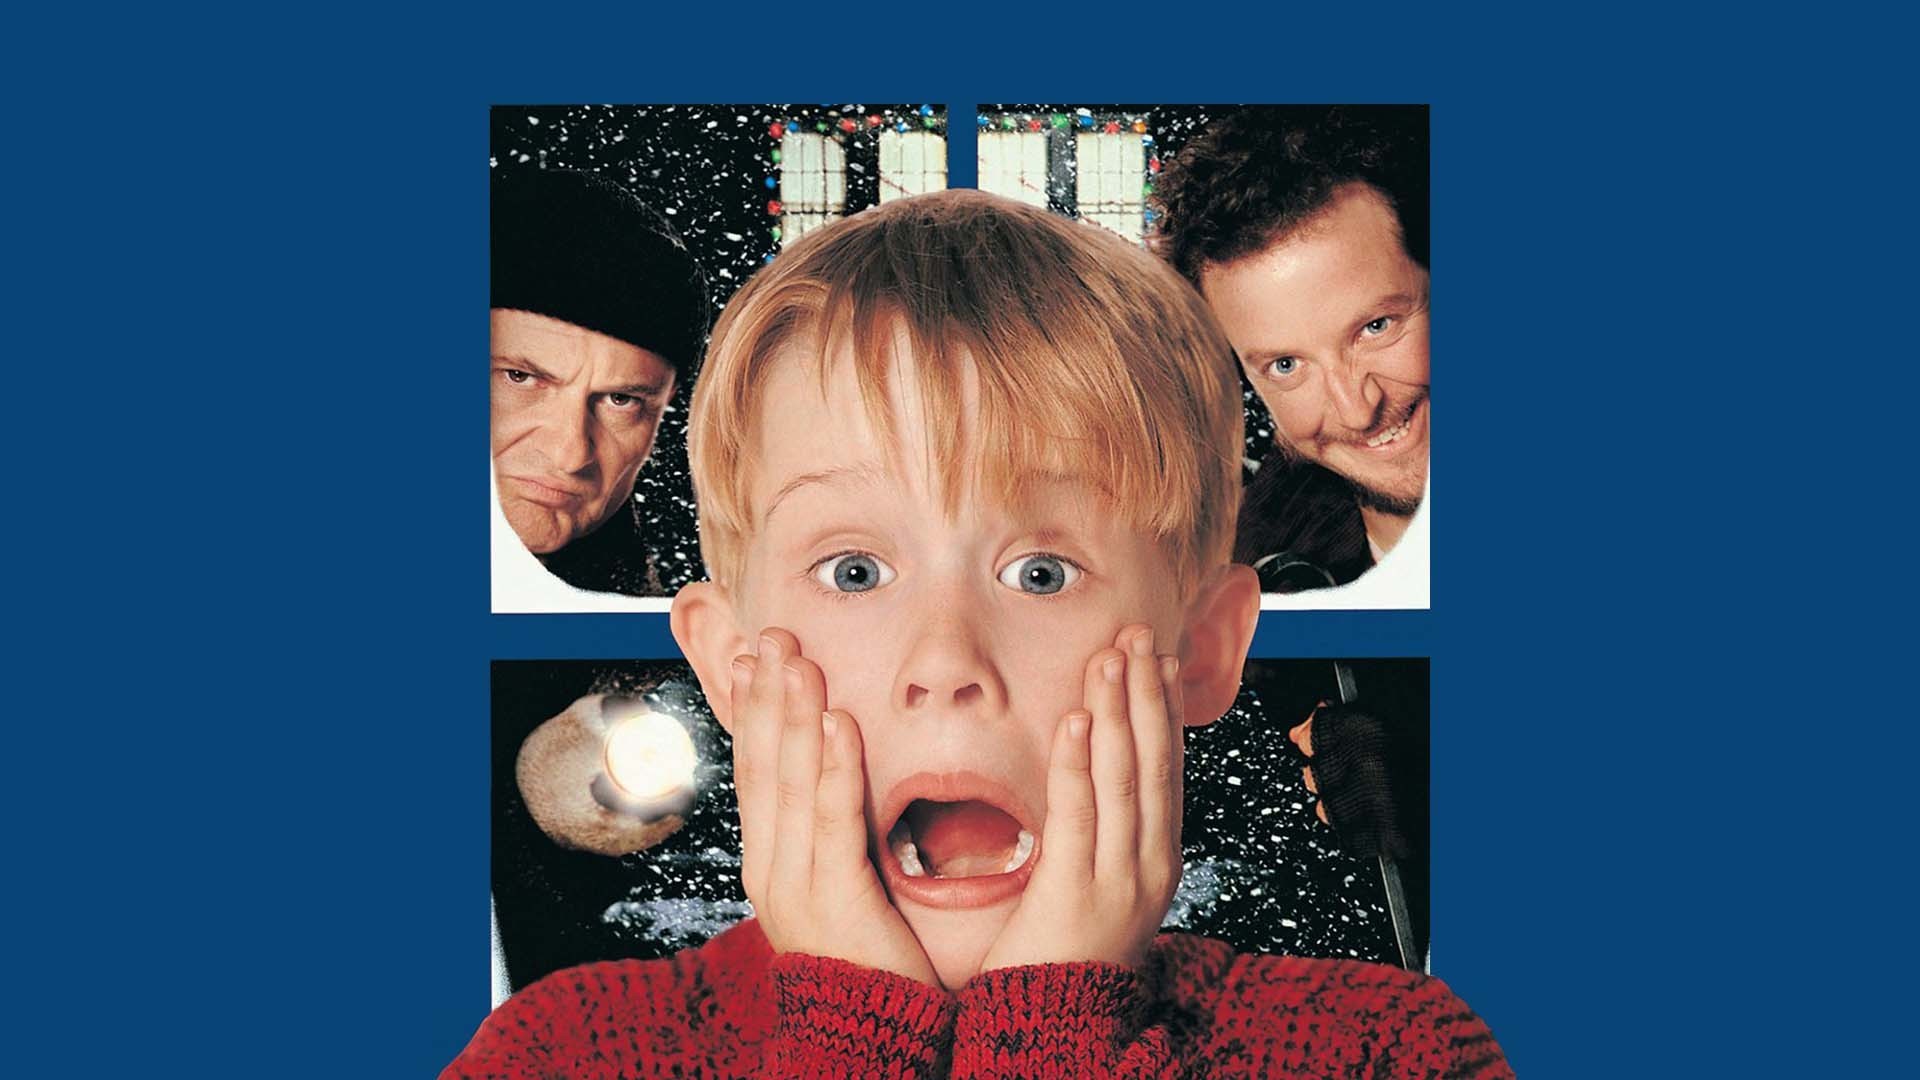 Home alone 4 movie hd torrent download